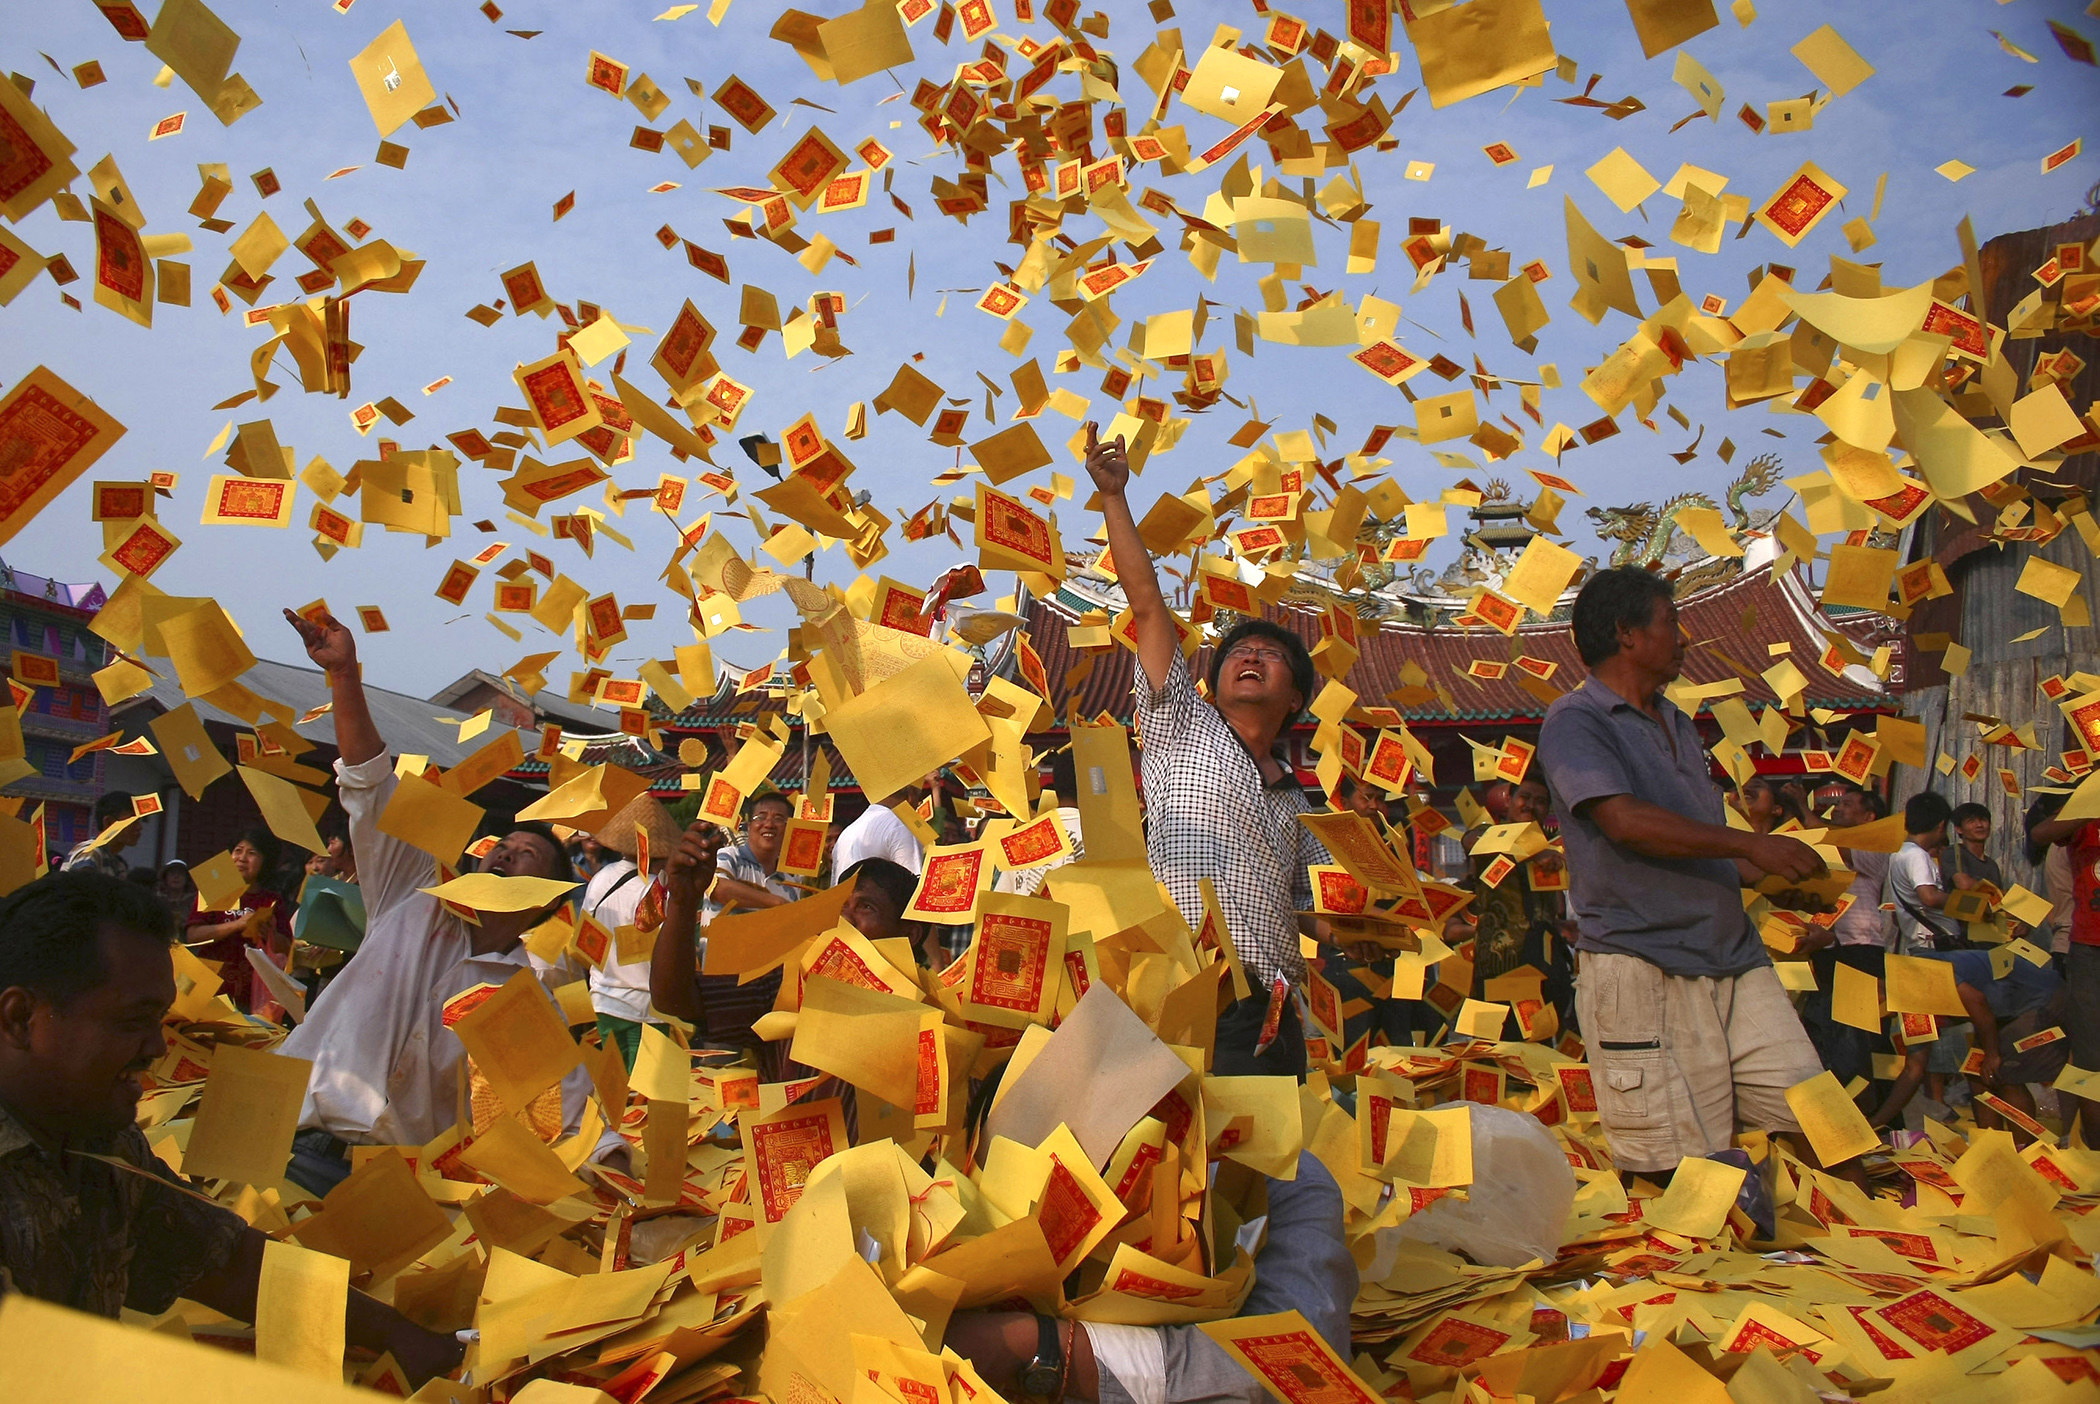 People in an East Asian temple throw yellow pieces of paper with red stamps on them into the air